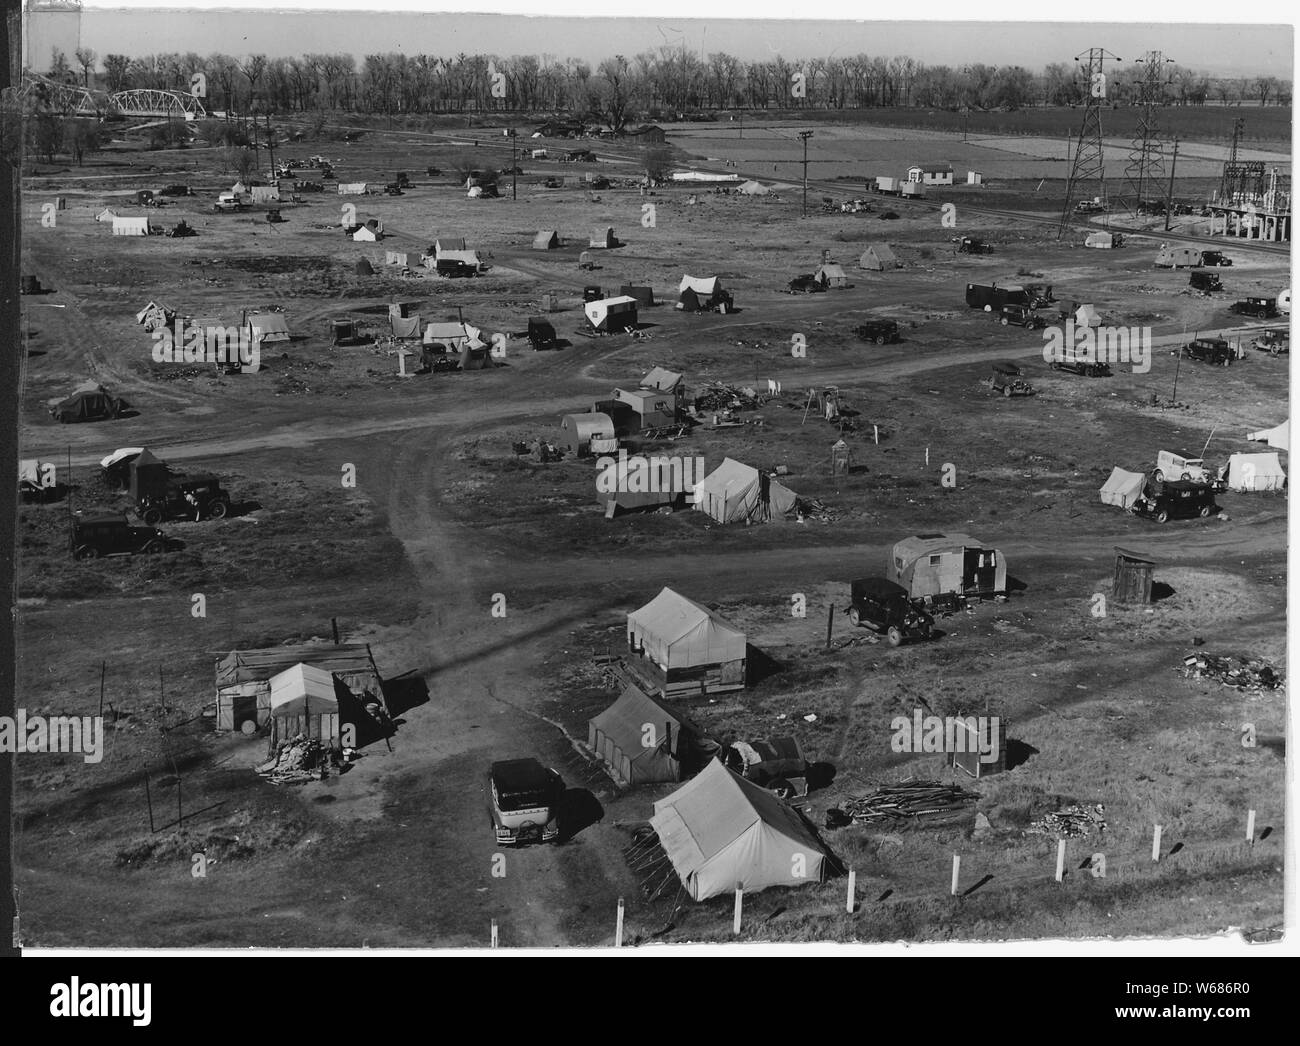 Sacramento, California. Squatter camp of agricultural labor migrants one-eighth mile outside city l . . .; Scope and content:  Full caption reads as follows: Sacramento, California. Squatter camp of agricultural labor migrants one-eighth mile outside city limits of State Capitol of California. Above 125 units, mostly families, without sanitation; water donated by power company from single faucet. Across the main road (upper right of panel) is a trailer camp. Beyond is a newly developing shack town community where lots are being sold and families are settling in makeshift home-built cabins and Stock Photo